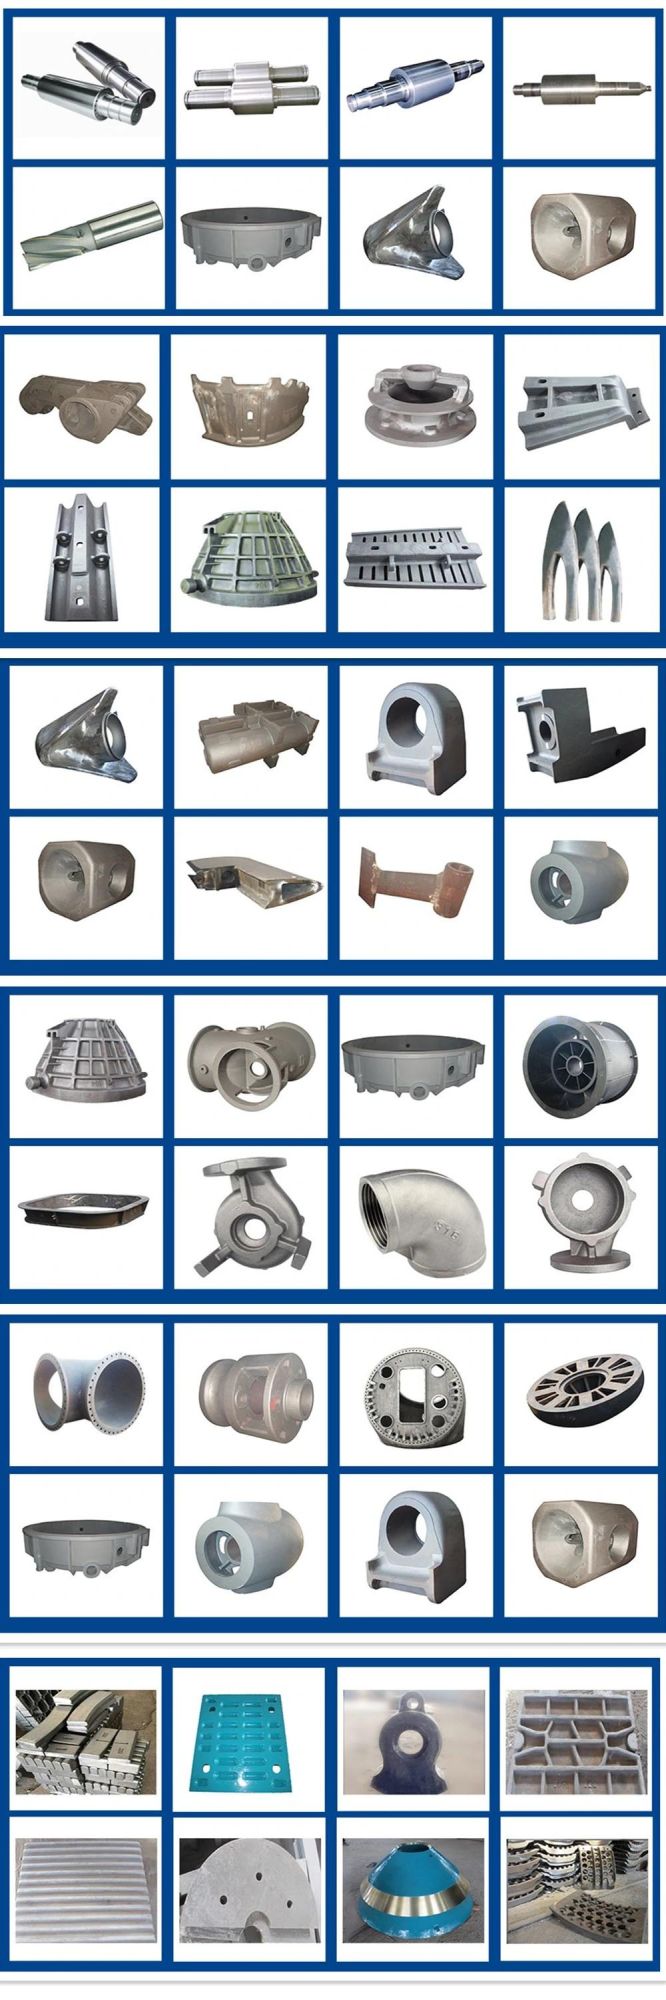 High Performance Sand Casting Cast Steel Ductile Iron Truck Forklift Rear Machine Parts